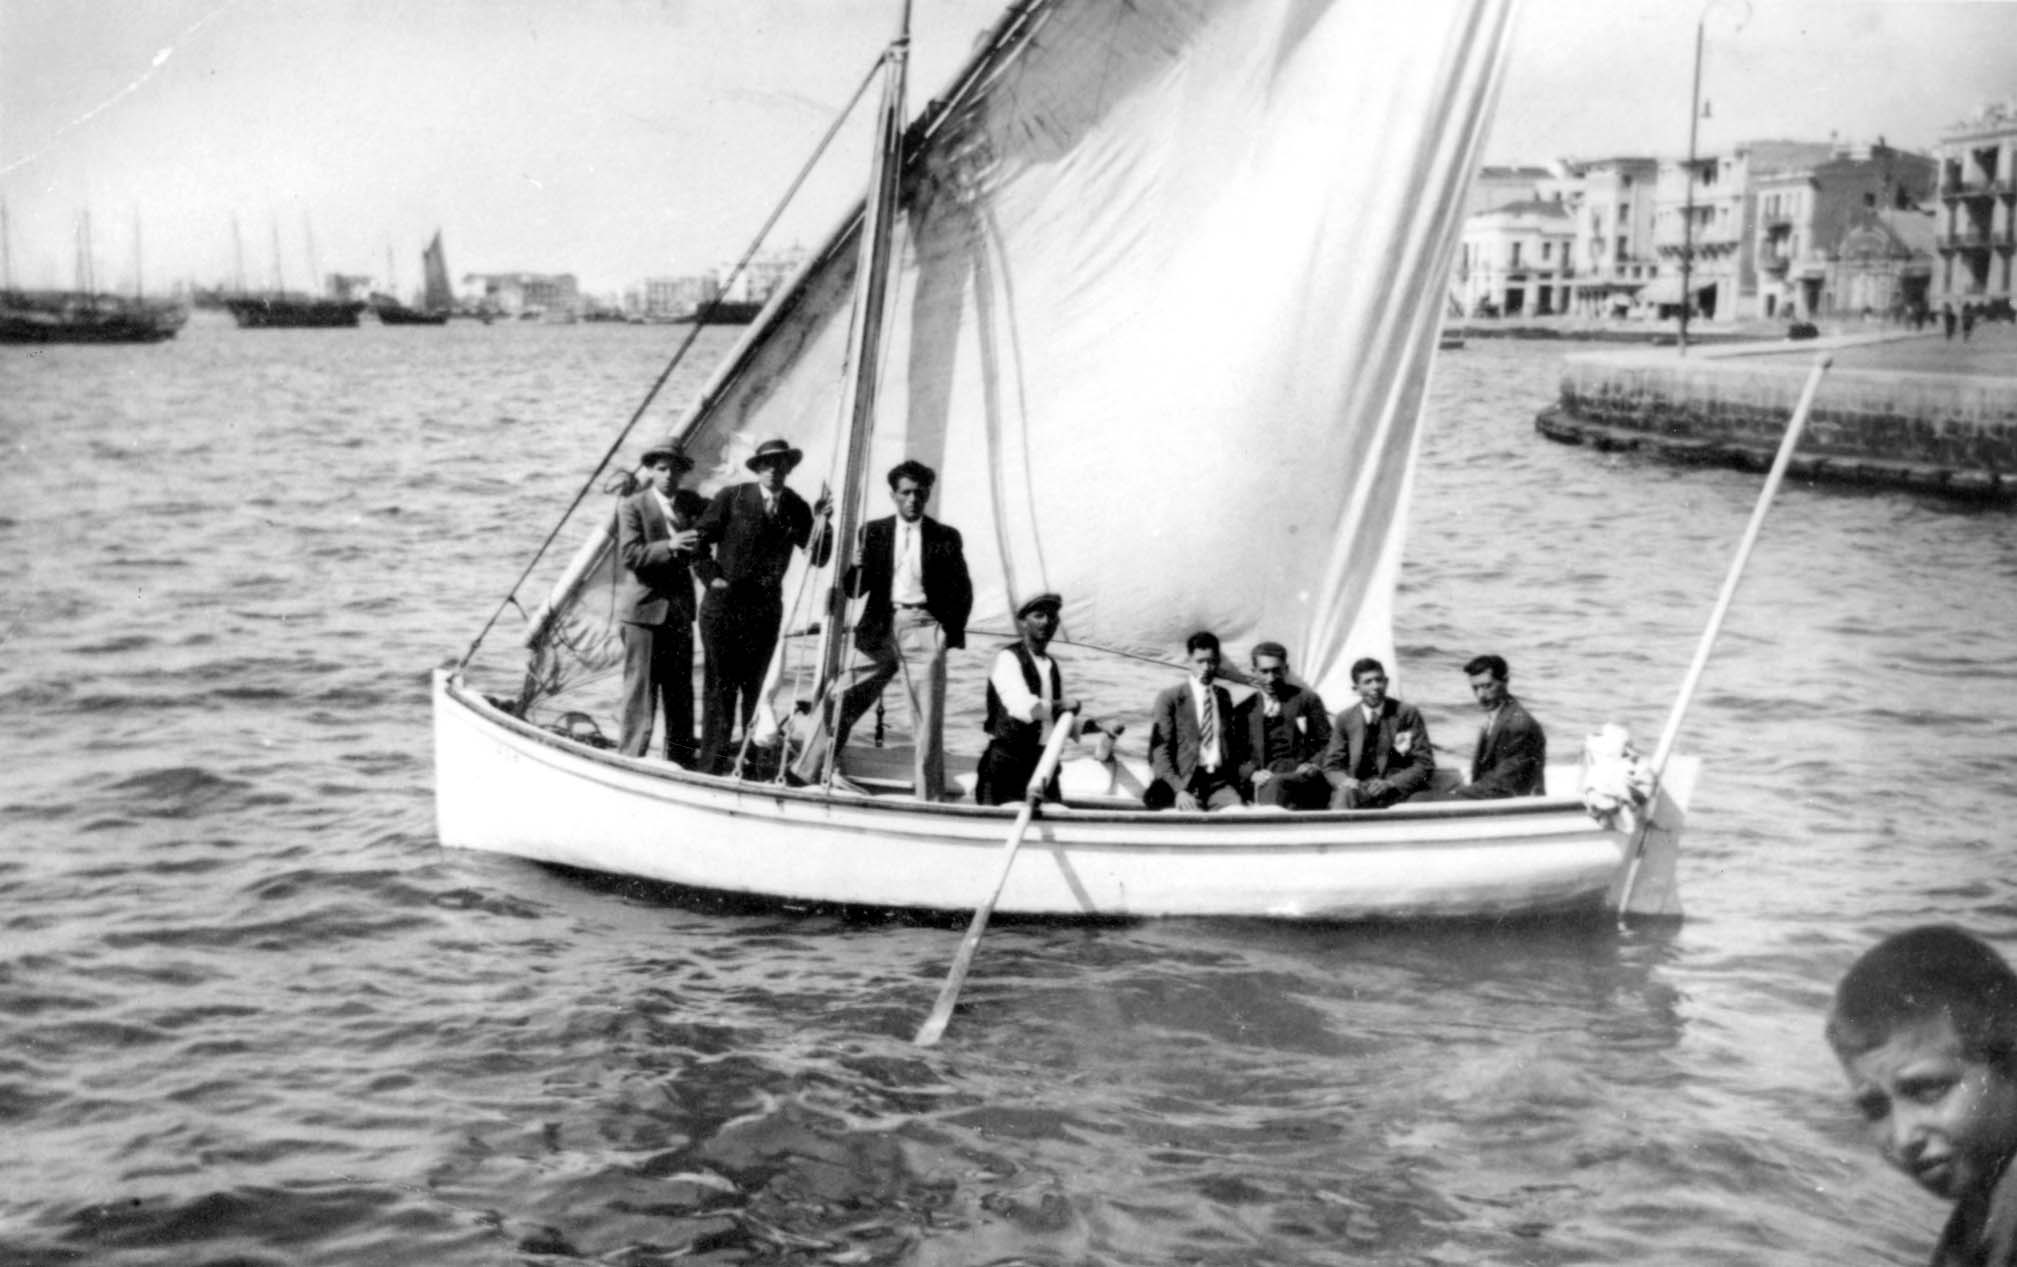 July 1939, Jewish youths from Monastir on a sailboat